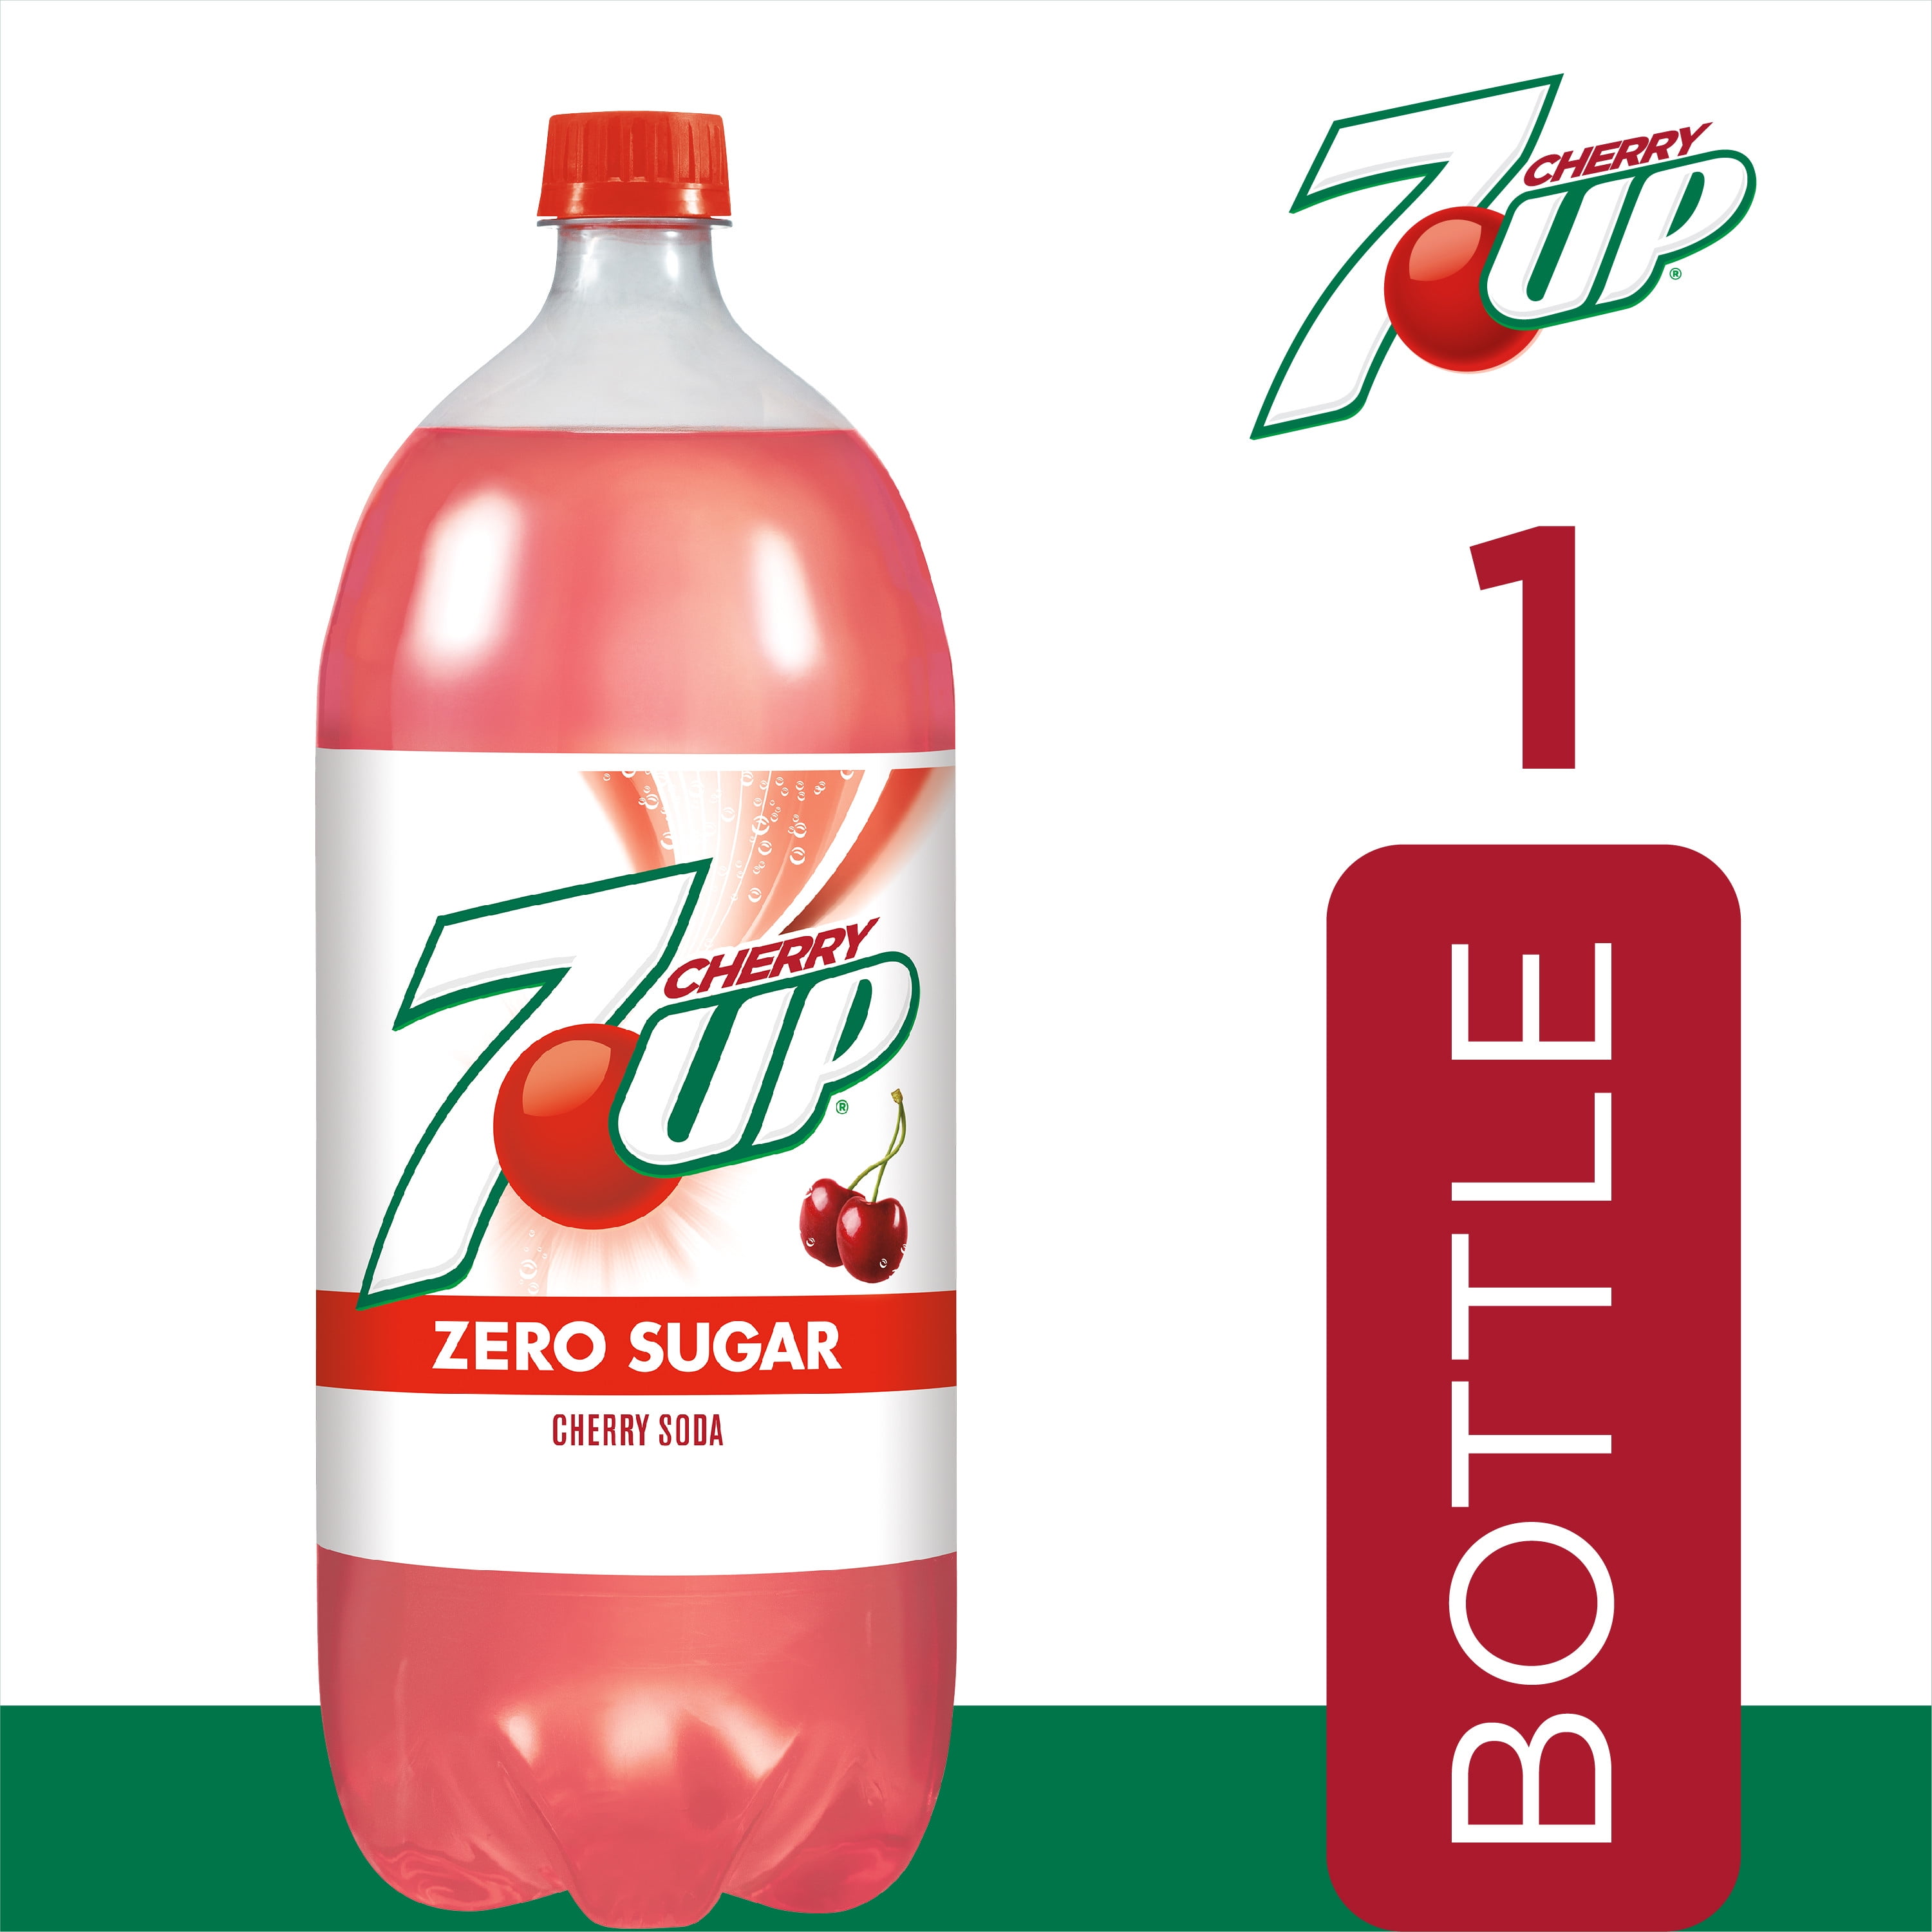 7UP Cherry Flavored Soda, 2 L Bottle